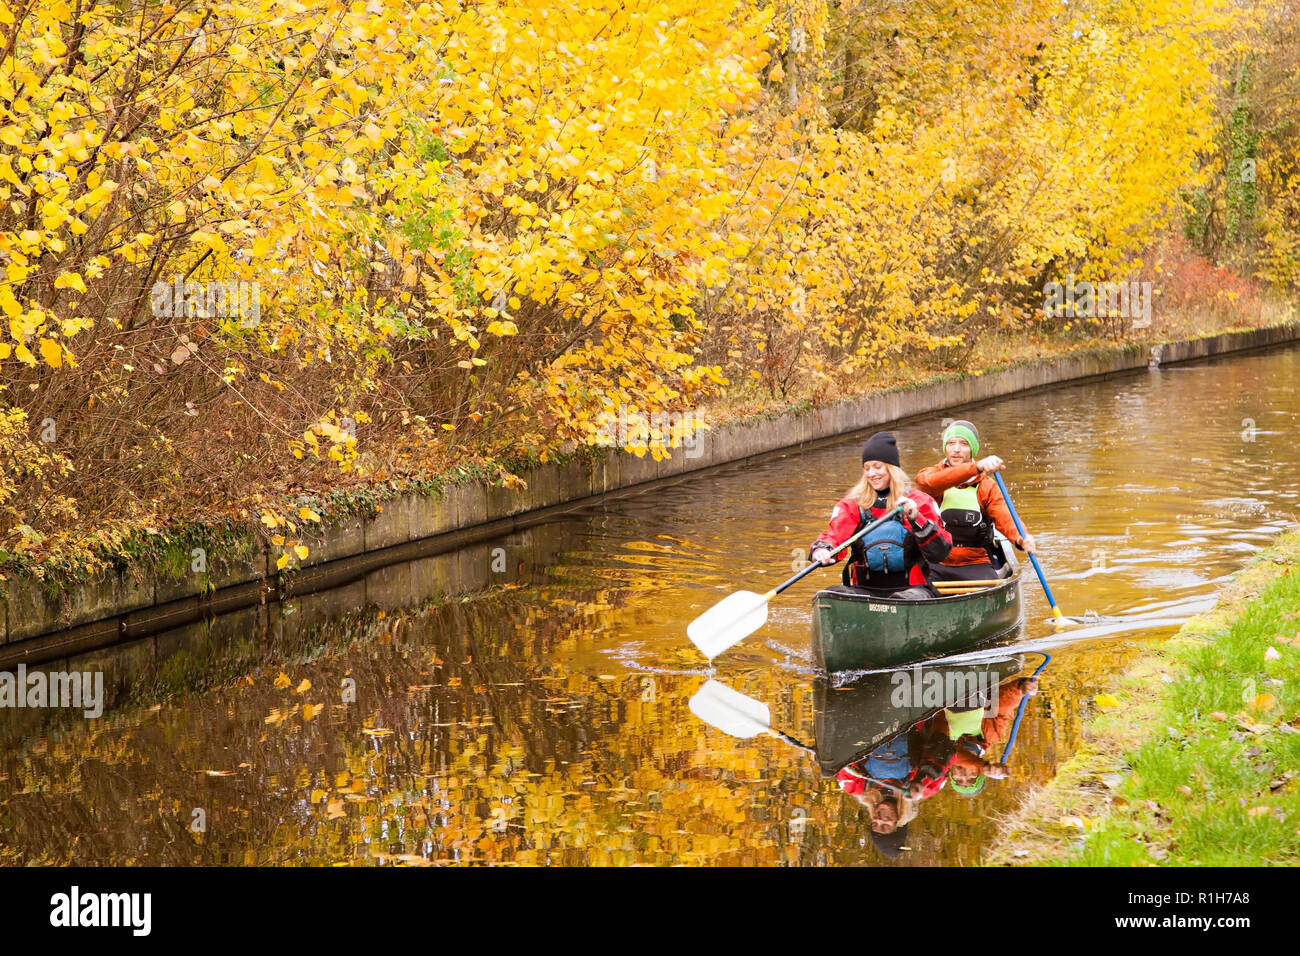 Man and woman canoeing on the 46 mile long Llangollen branch of the Shropshire union canal with glorious Autumn colours in the trees along the towpath Stock Photo